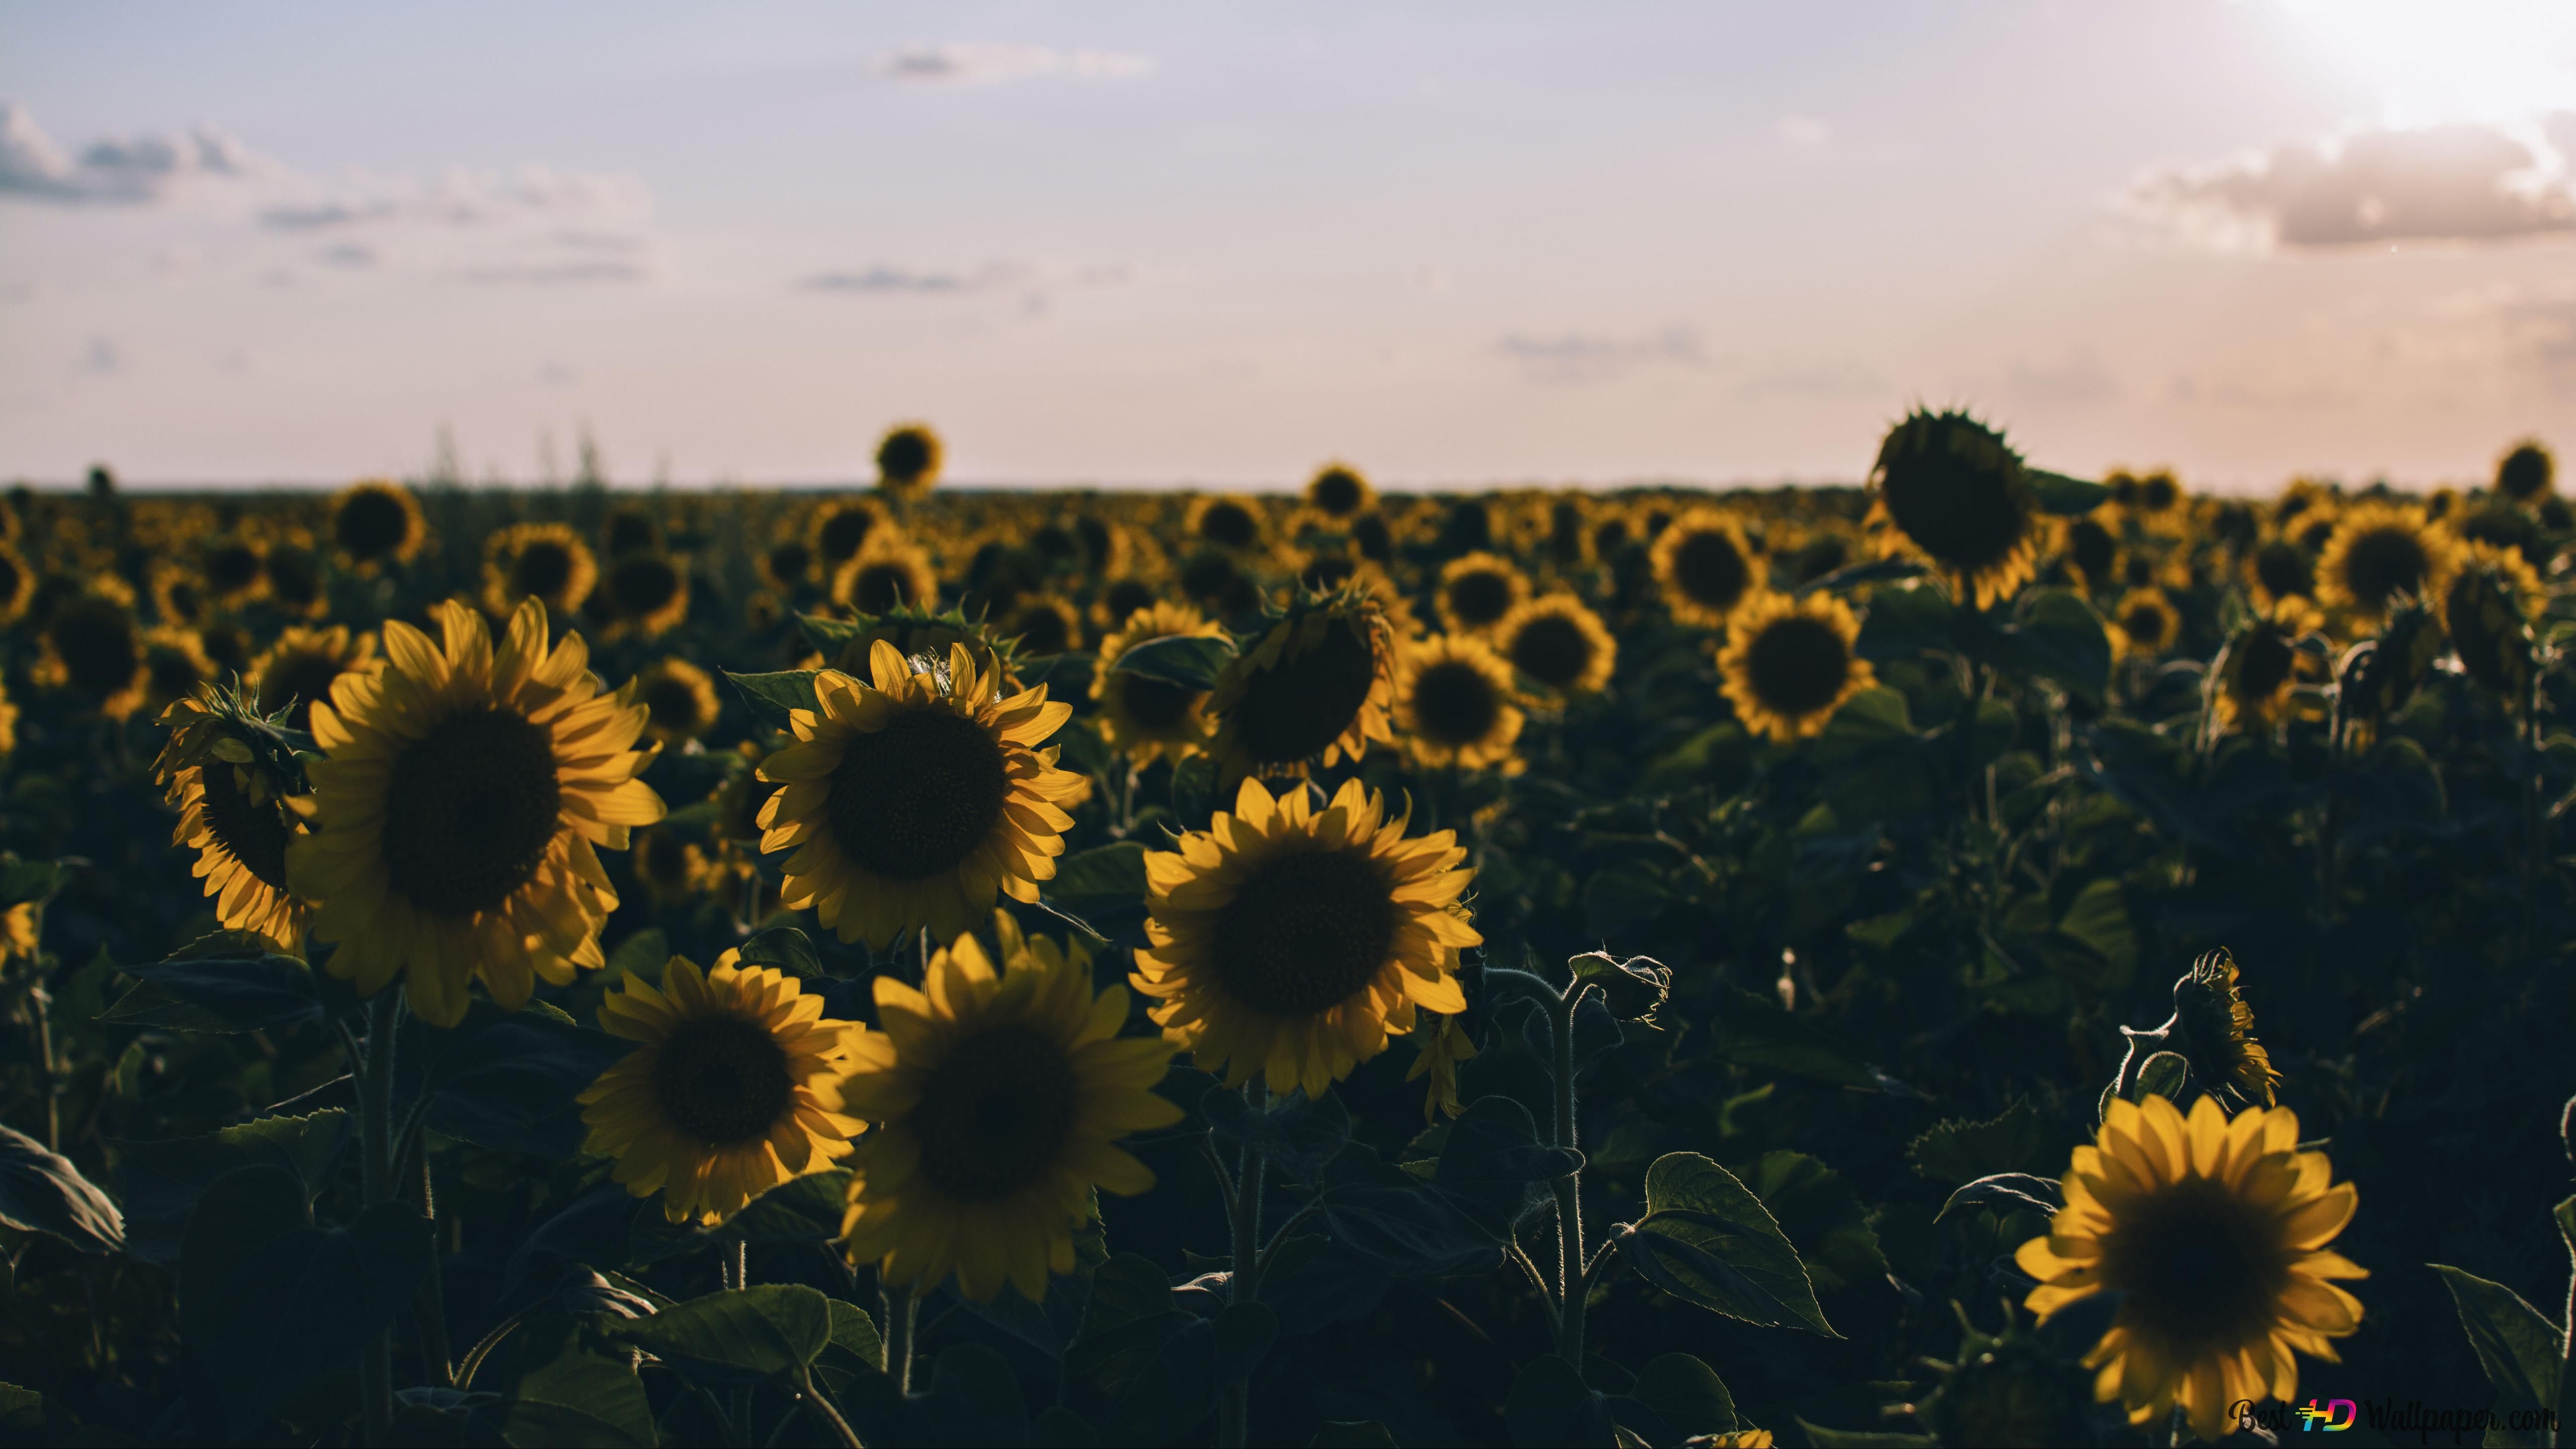 A field of sunflowers with the sky in background - Sunflower